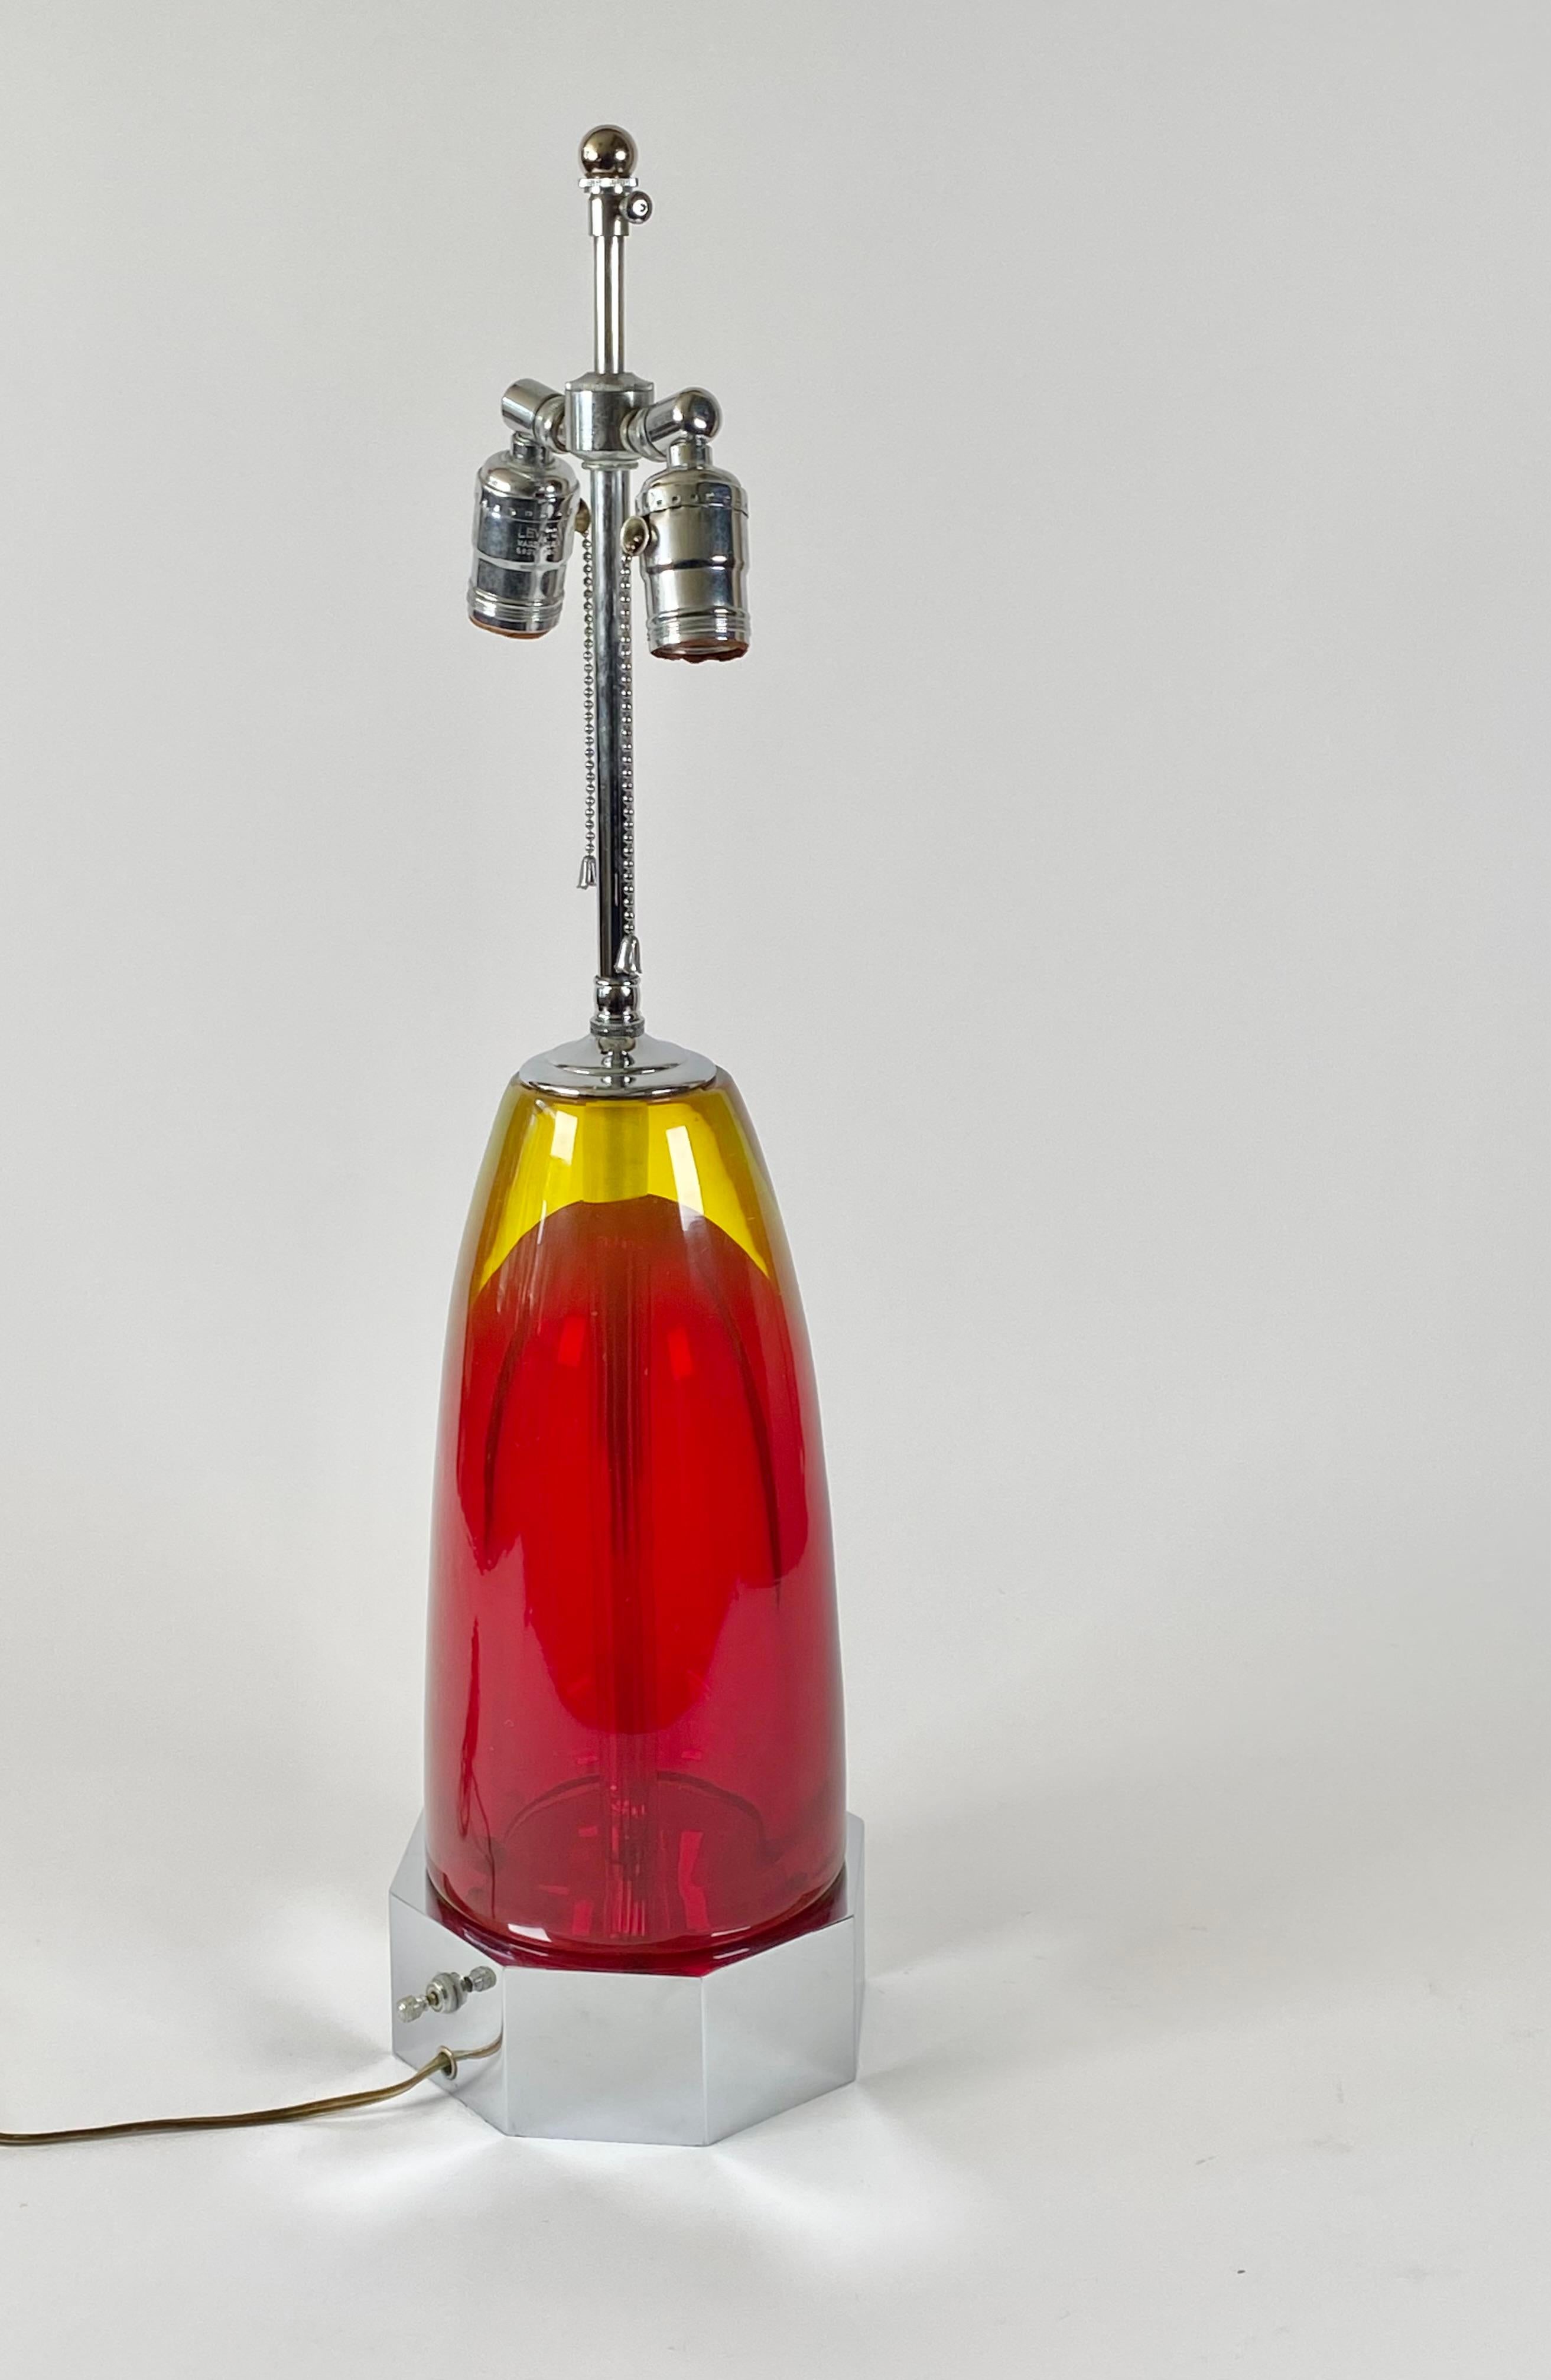 Handmade Murano glass lamp circa 1950s to early 1960s, thick glass body with a soft red to contrasting gold-green color, having the original high grade chromed hardware, with two pull chain sockets as well as a switch at the base which is in a form